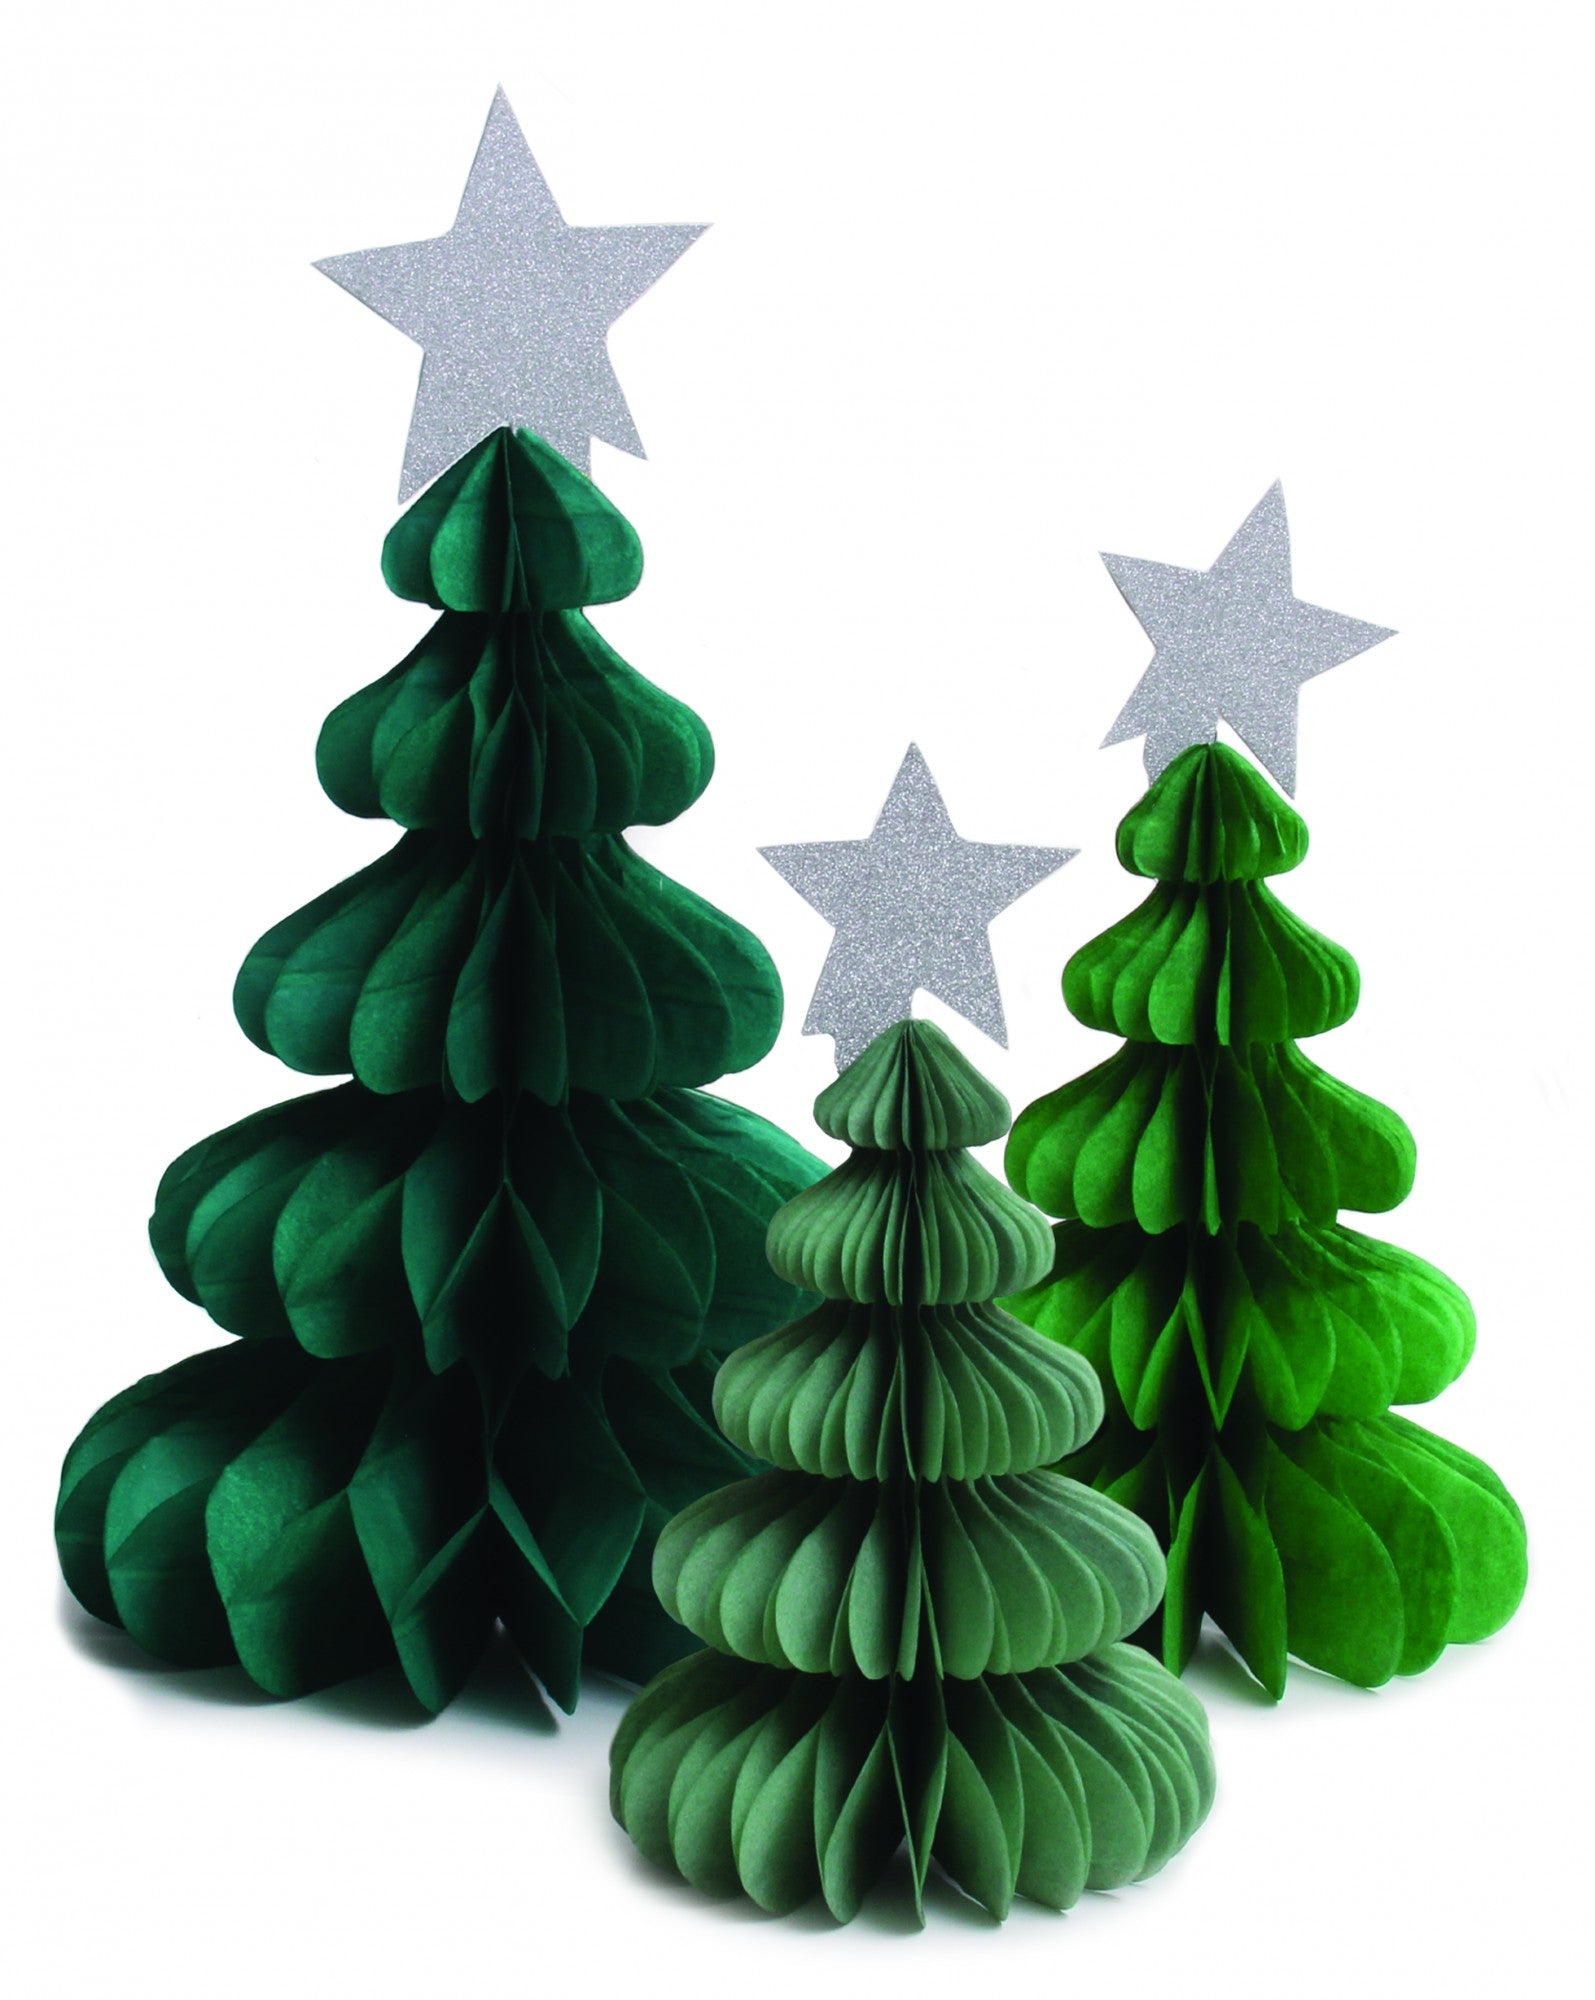 View Paper Christmas Tree Decorations Pack of 3 information